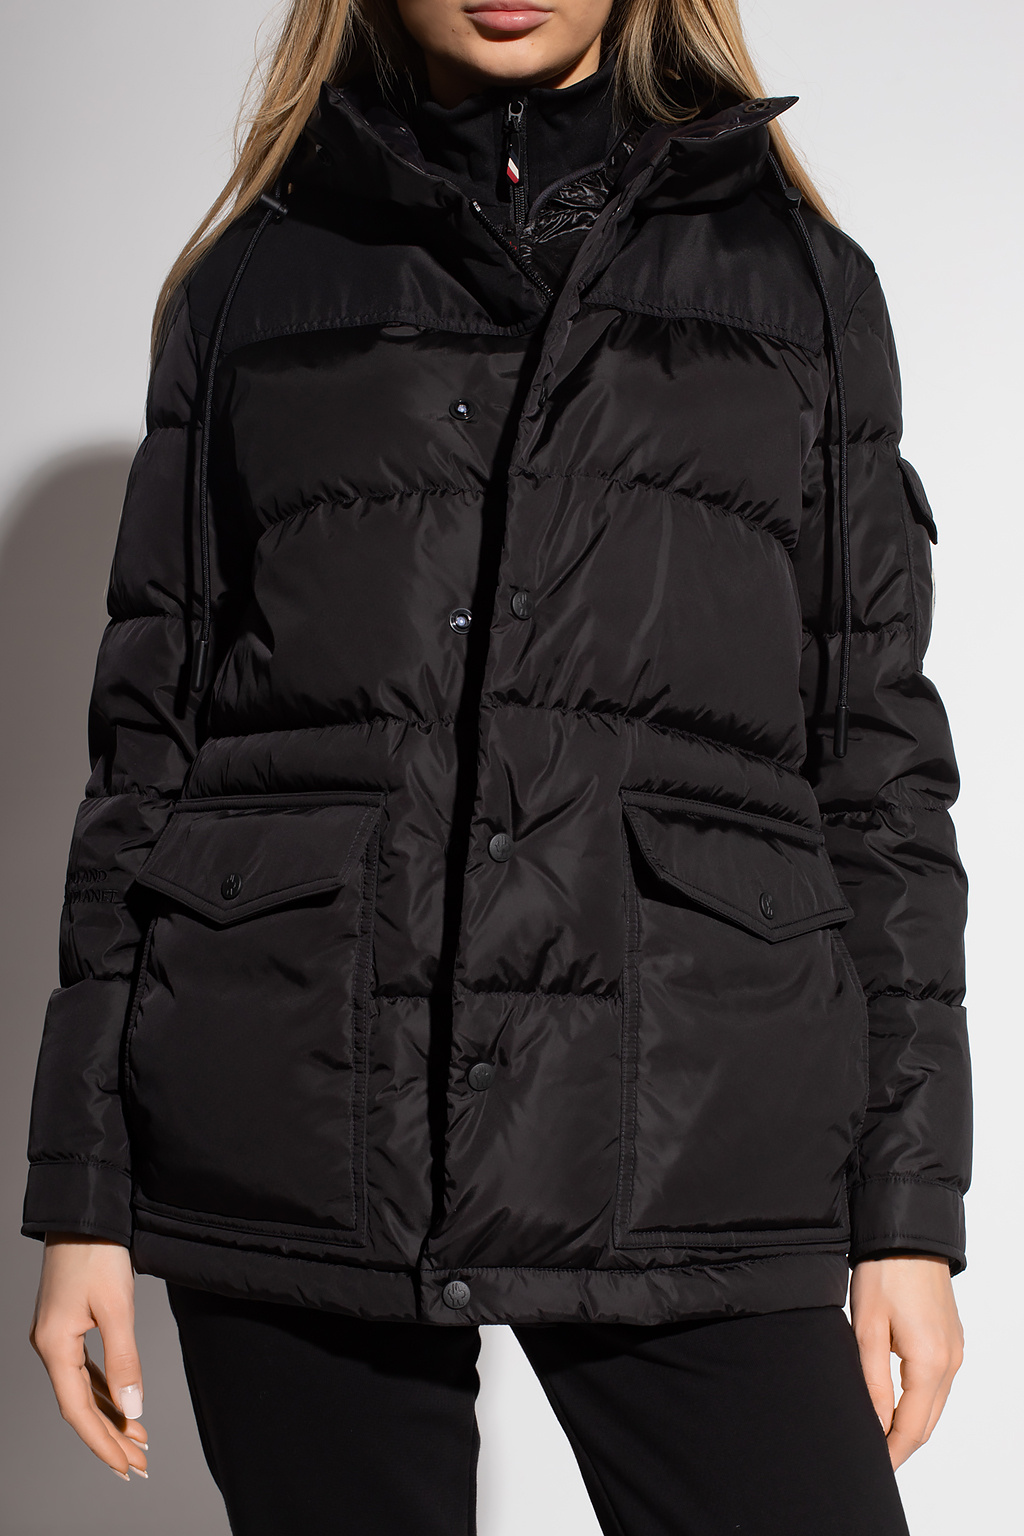 IetpShops Italy - 'Erquy' down jacket Moncler - Puma Amplified T 